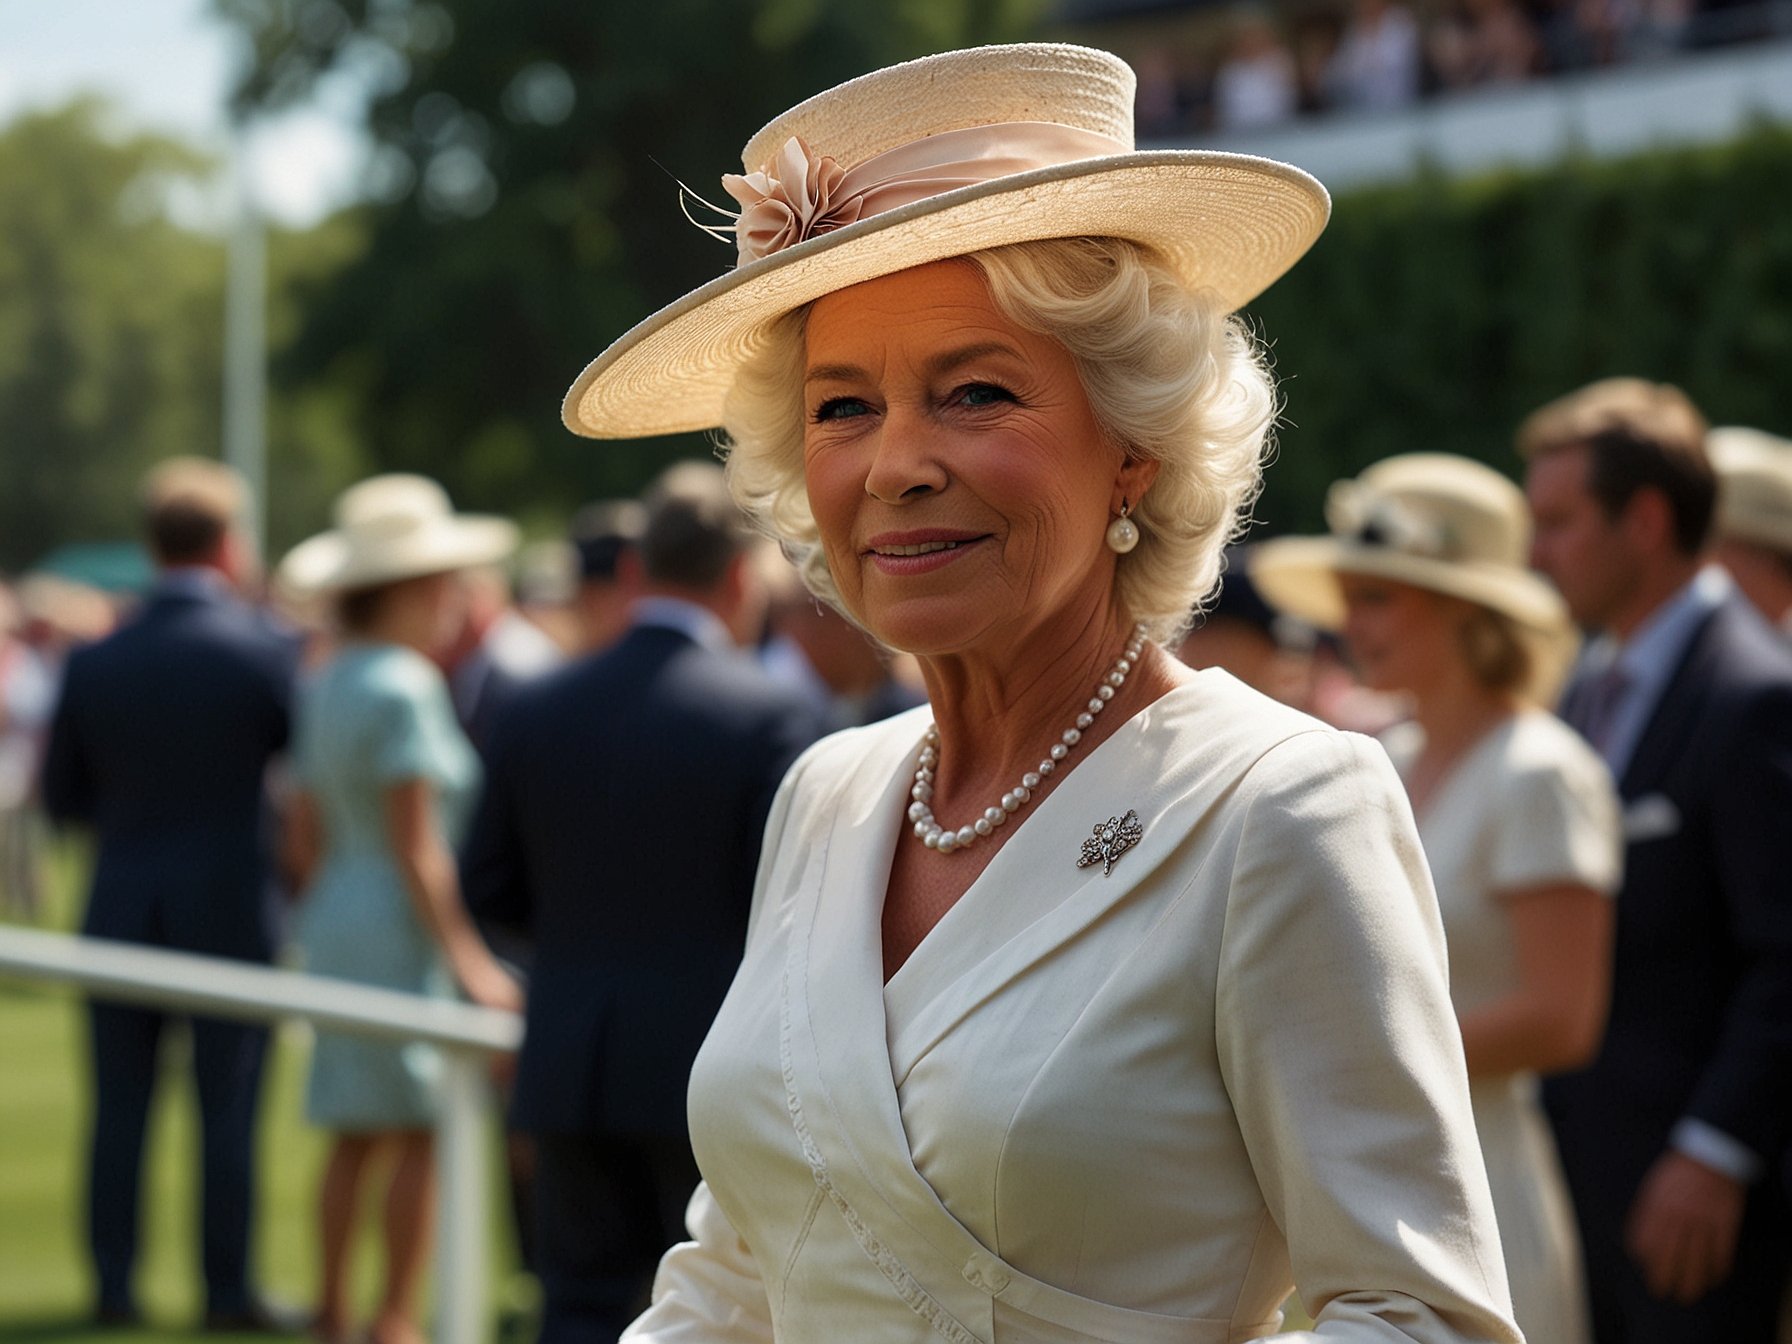 Queen Camilla wearing a stunning white wrap dress and an elegant hat, arriving at Royal Ascot Ladies' Day. Her regal presence and fashion sense command the crowd's attention.